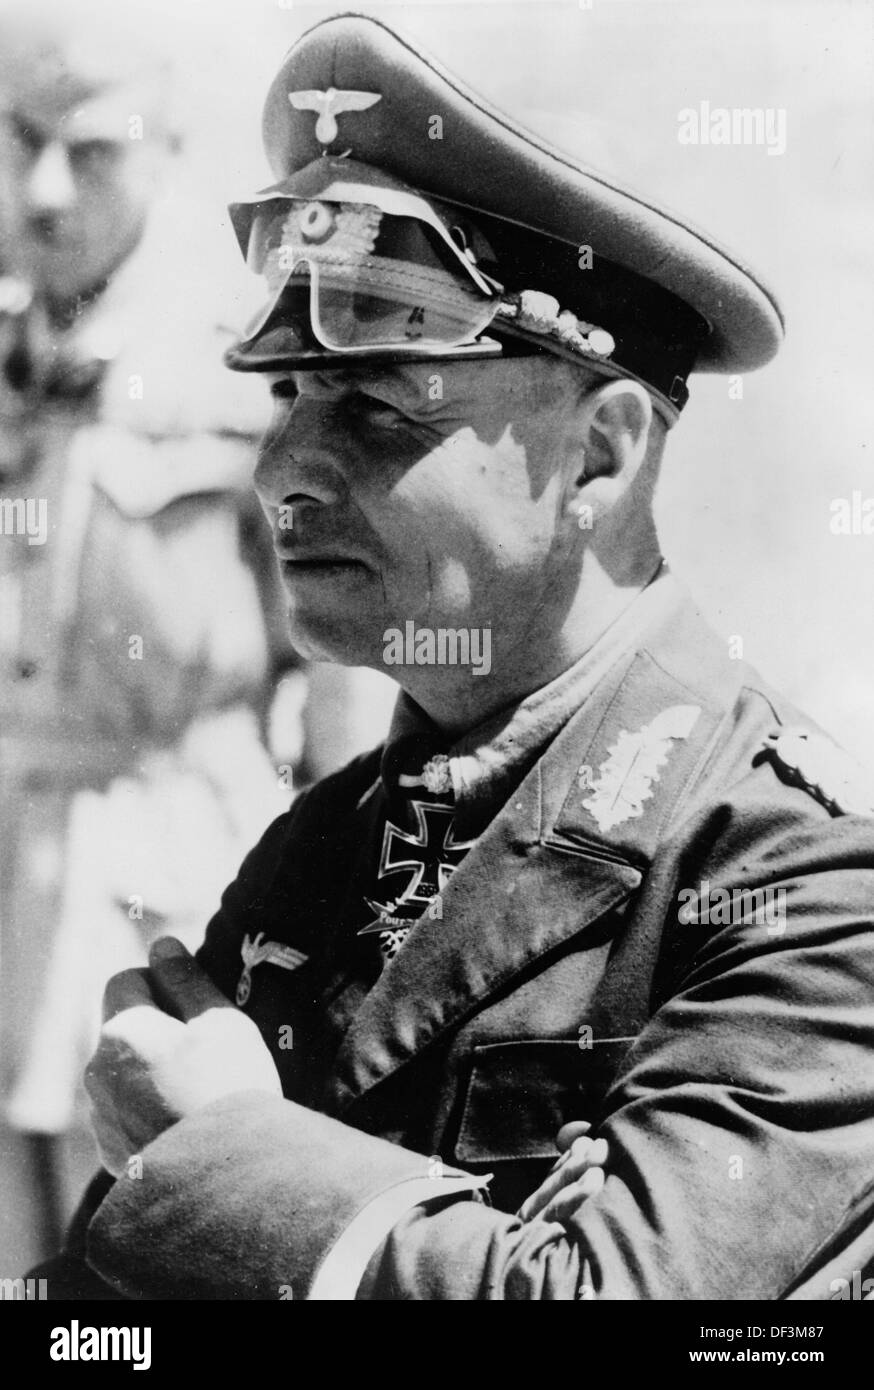 Field Marshal Erwin Rommel is decorated with the 'Knight's Cross of the Iron Cross with Oak Leaves and Swords' by Adolf Hitler on 20 January 1942. Place unknown. The Nazi Propaganda! on the back of the image is dated 21 January 1942: 'A Knight's Cross of the Iron Cross with Oak Leaves and Swords for General Rommel. The Führer and Supreme Commander of the Armed Forces awarded the General of the Tank Division Rommel, Commander of the Tank Division Afrika, with the Knight's Cross of the Iron Cross with Oak Leaves and Swords on 20 January 1942. Our image shows: General Rommel.' Photo: Berliner Ver Stock Photo